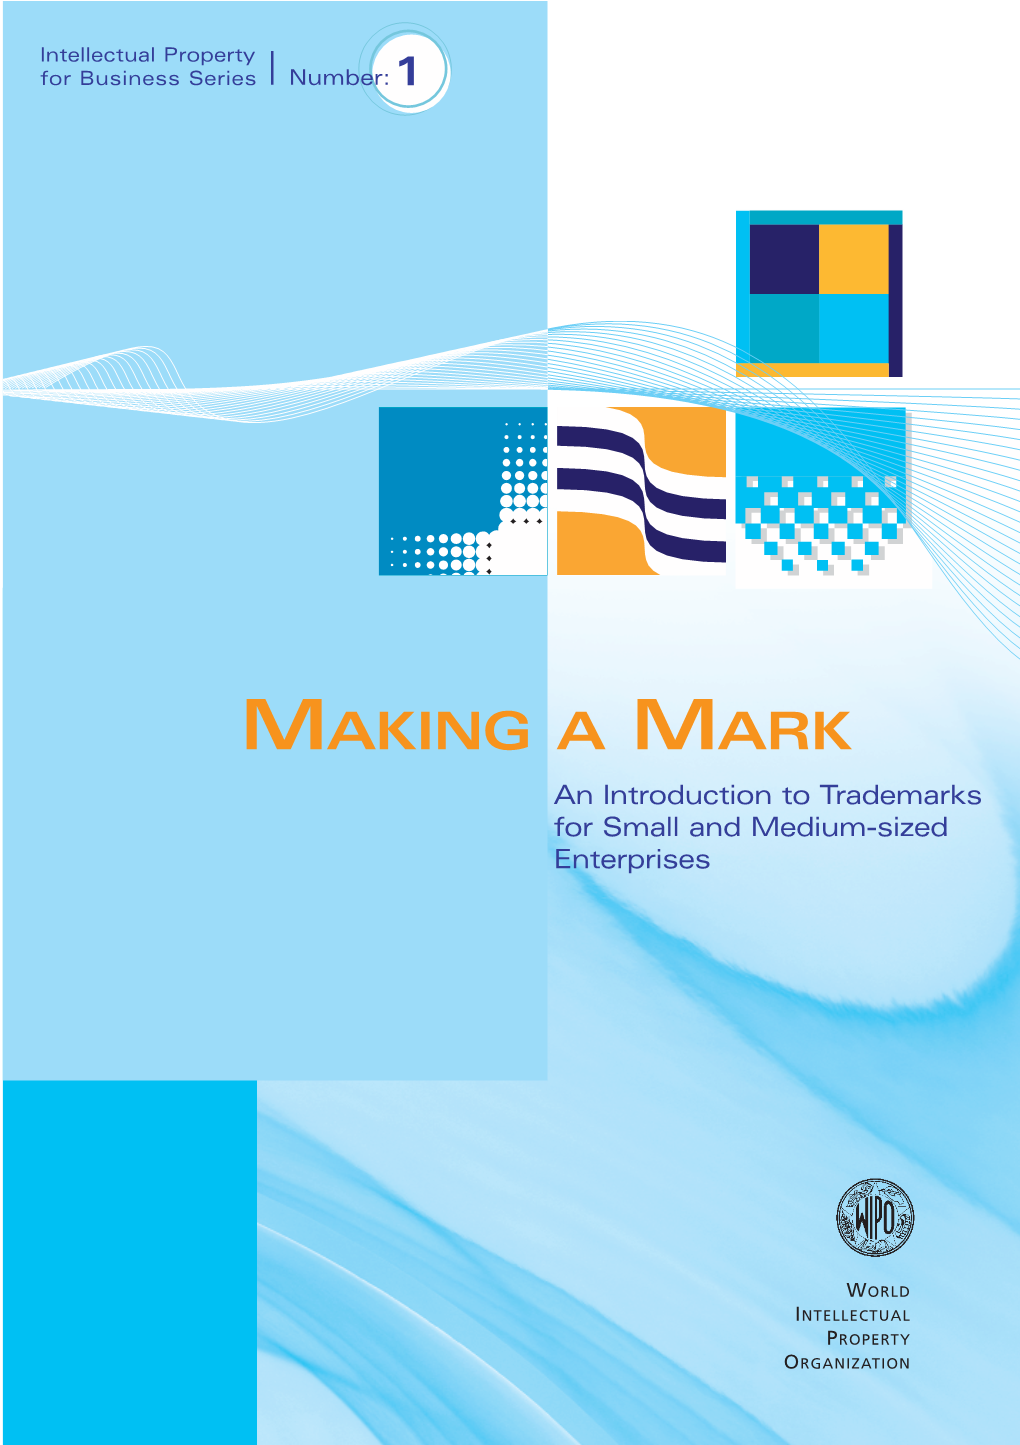 MAKING a MARK an Introduction to Trademarks for Small and Medium-Sized Enterprises